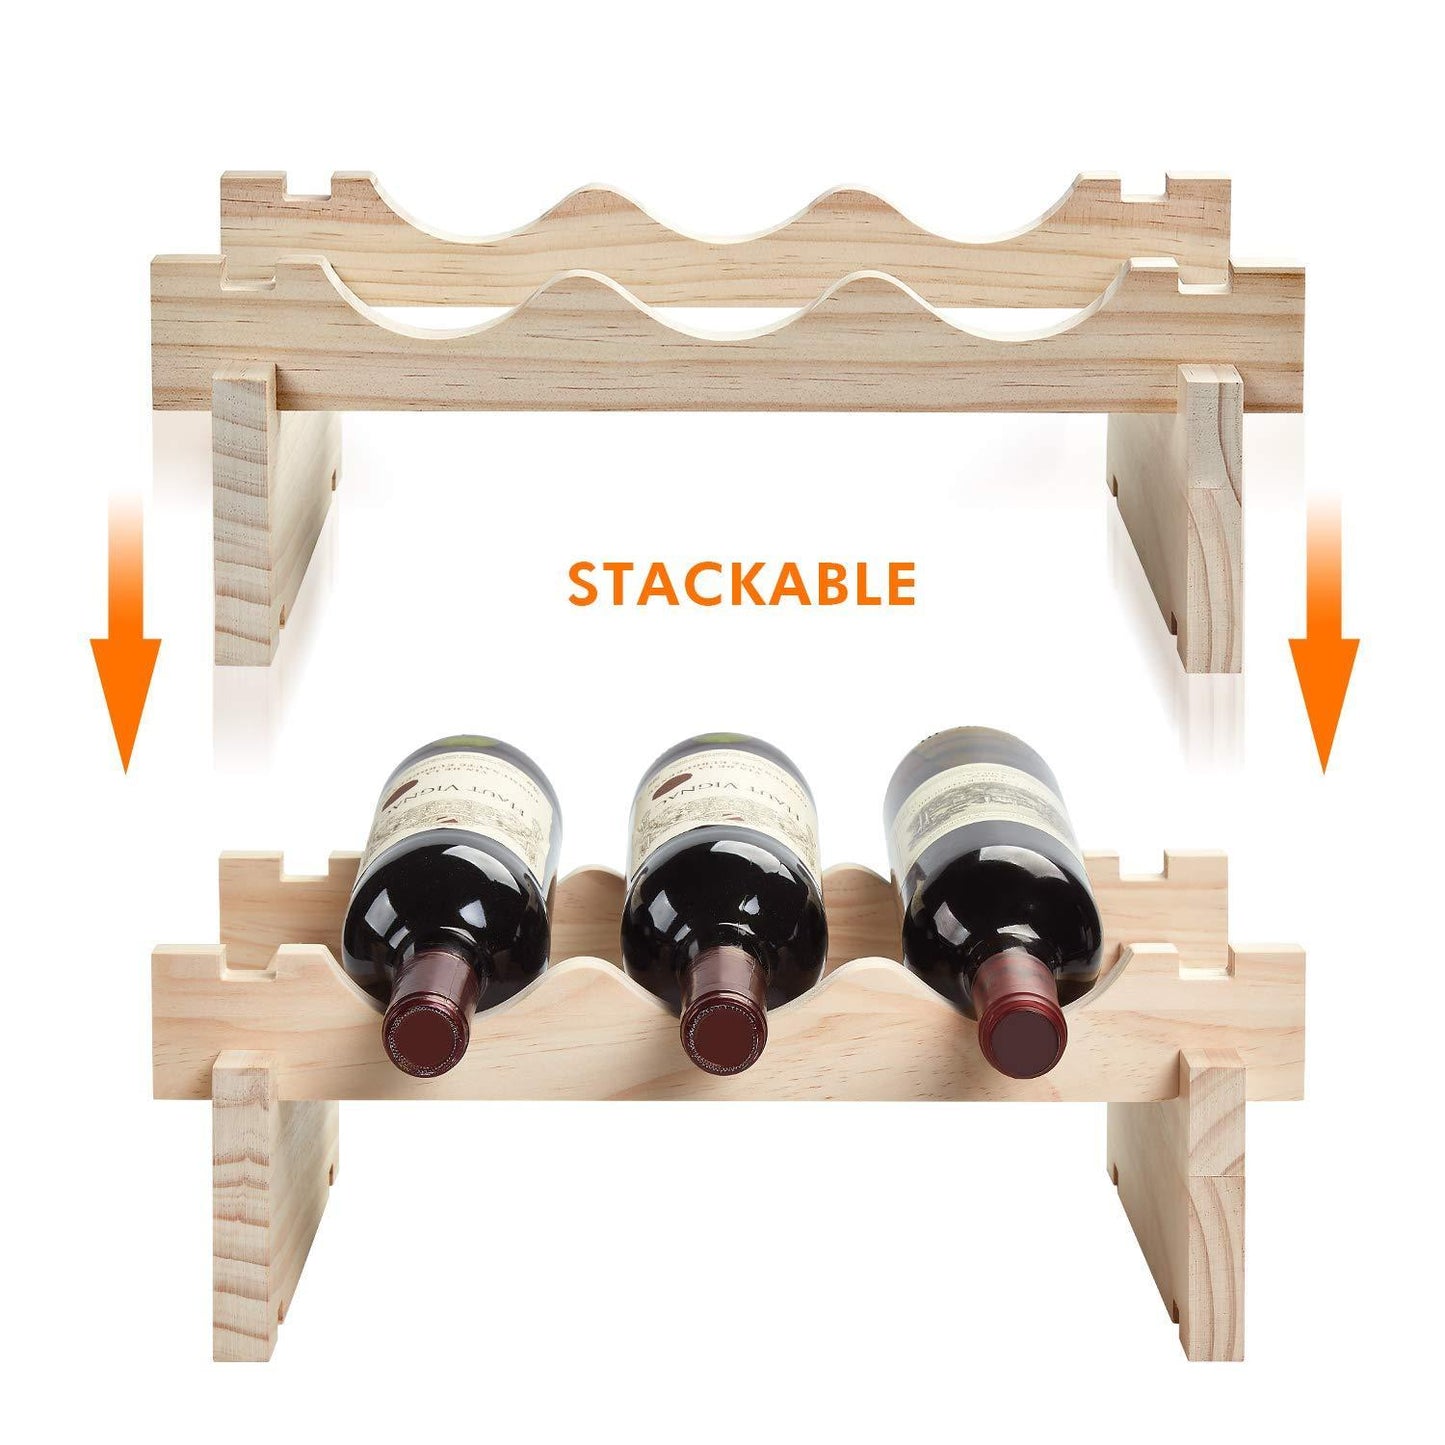 On amazon defway wood wine rack countertop stackable storage wine holder 12 bottle display free standing natural wooden shelf for bar kitchen 4 tier natural wood